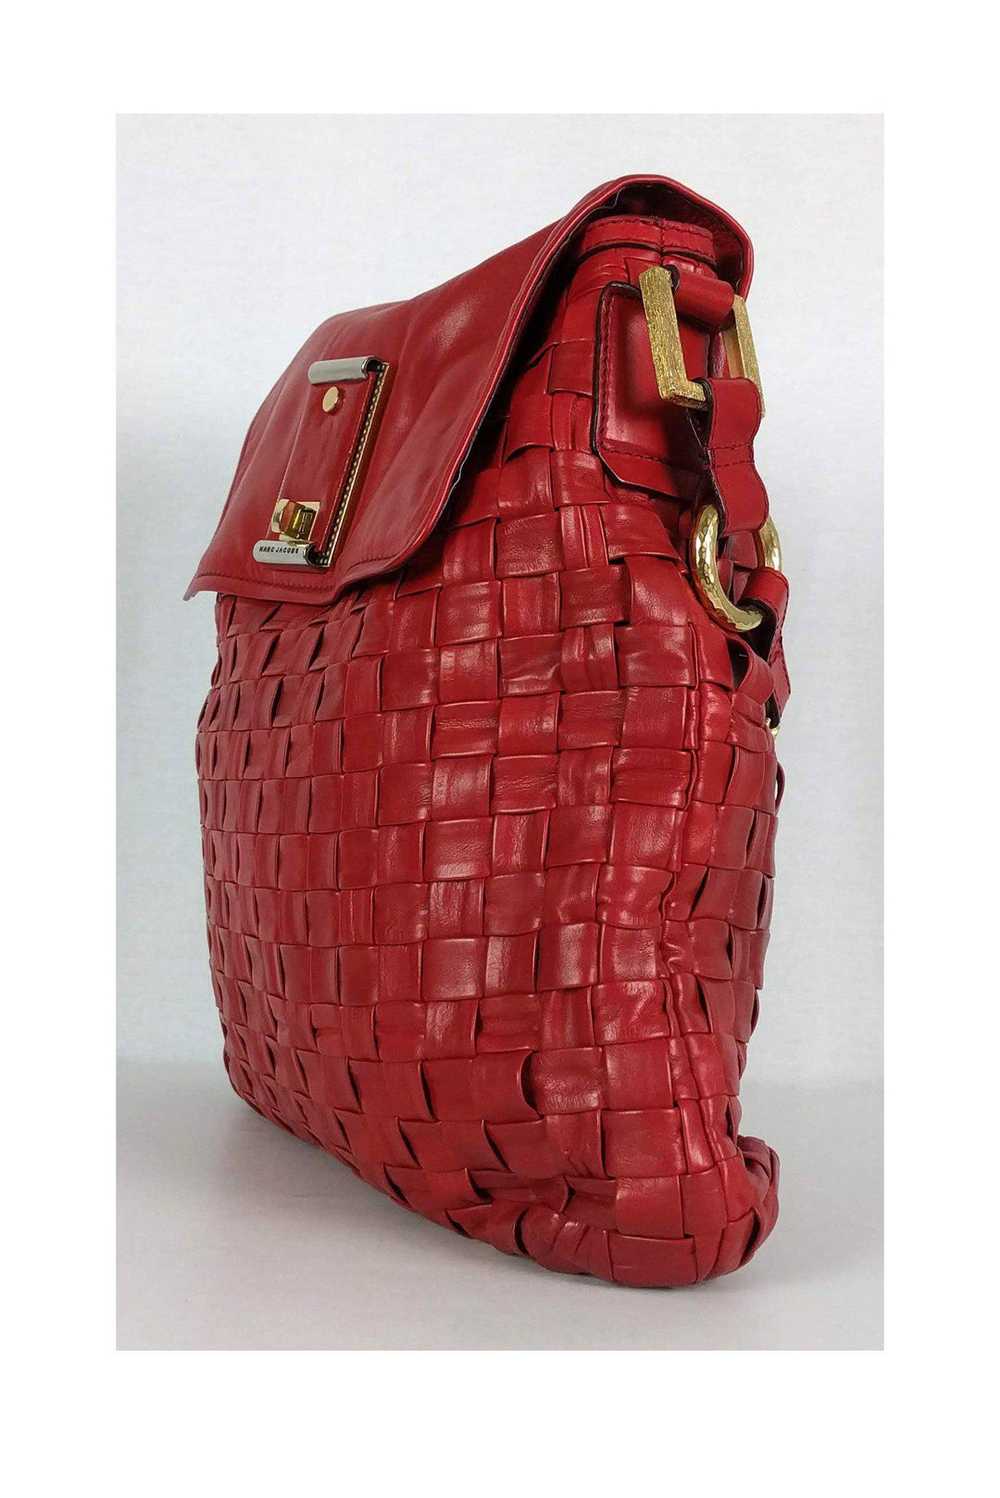 Marc Jacobs - Red Leather Elsa Woven Bag - image 2